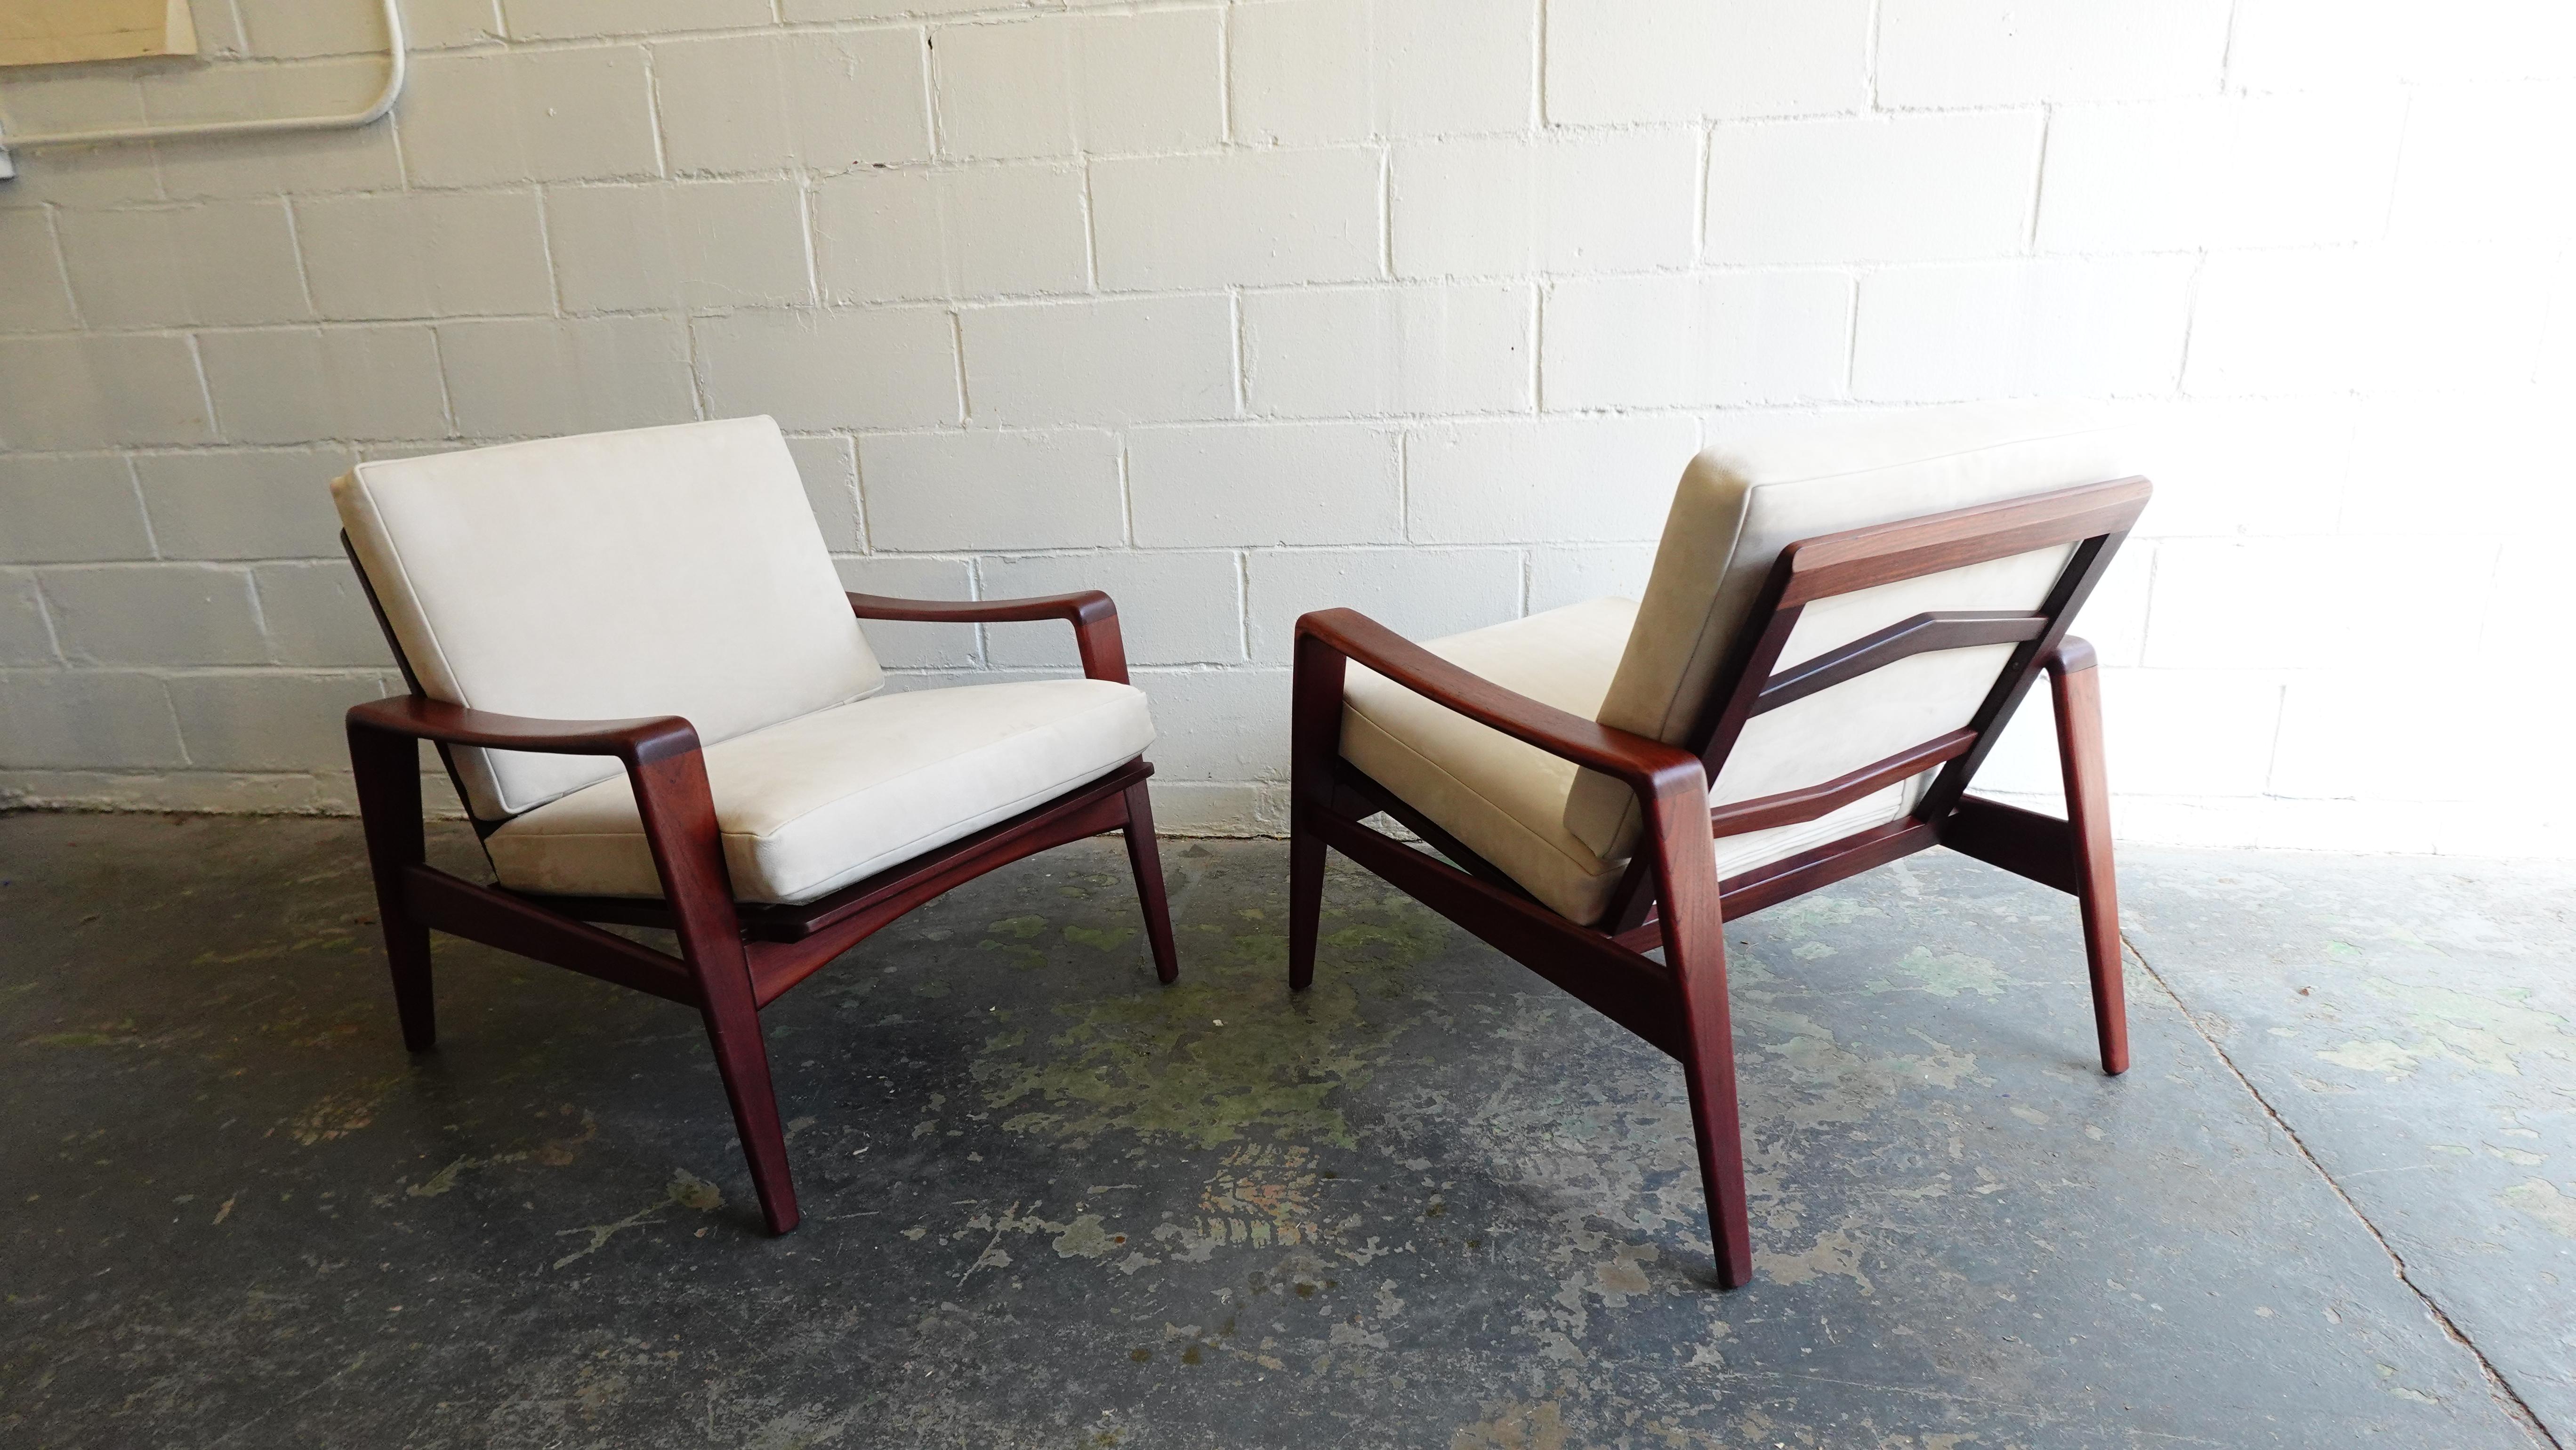 Pair of Arne Wahl Iverson Lounge Chairs for Komfort in Teak & Leather, 1960 For Sale 3